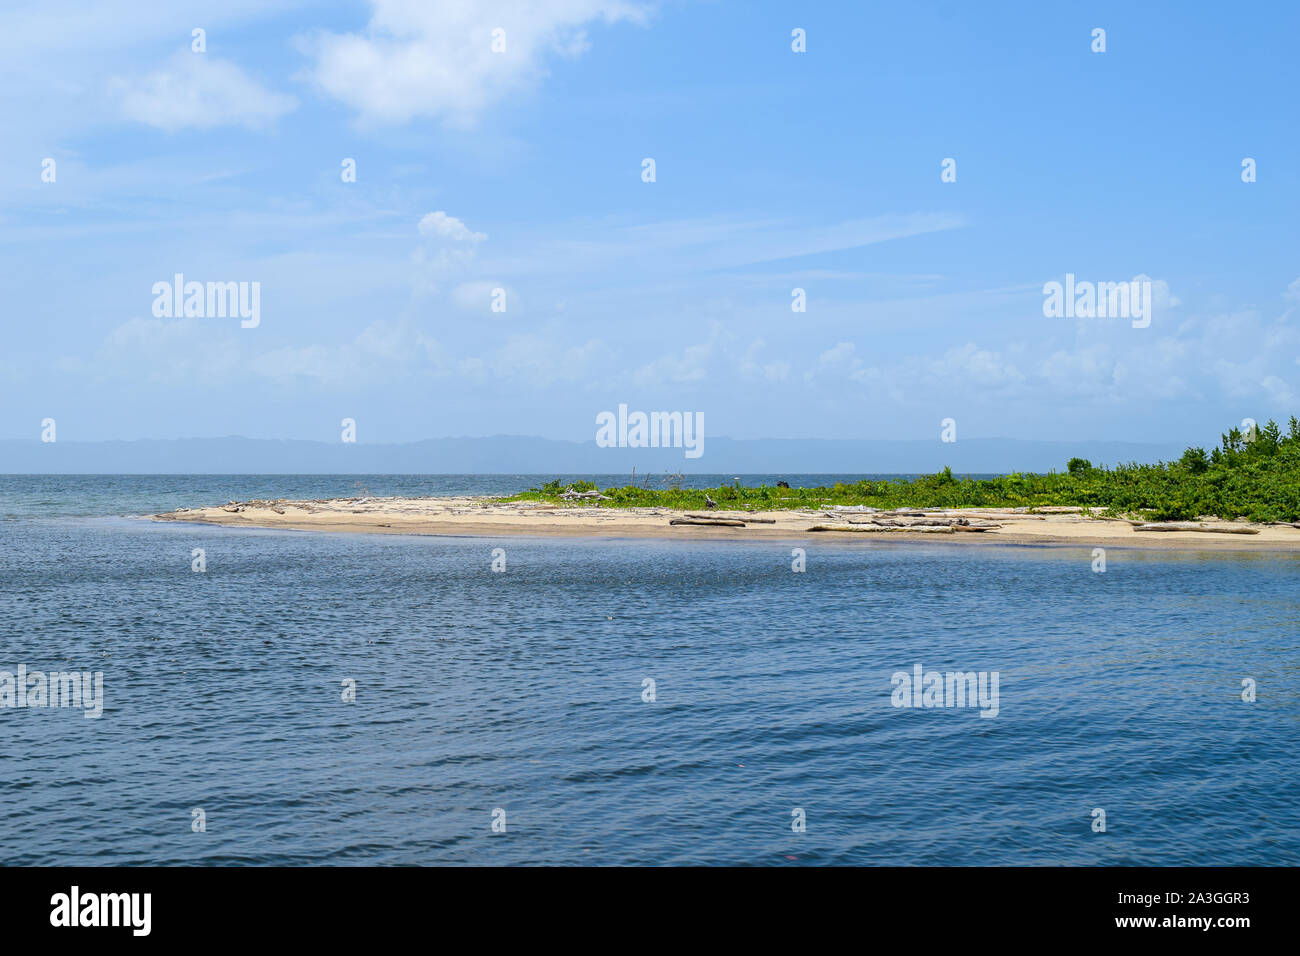 lonely island in the caribbean sea with tree trunks in sand Stock Photo